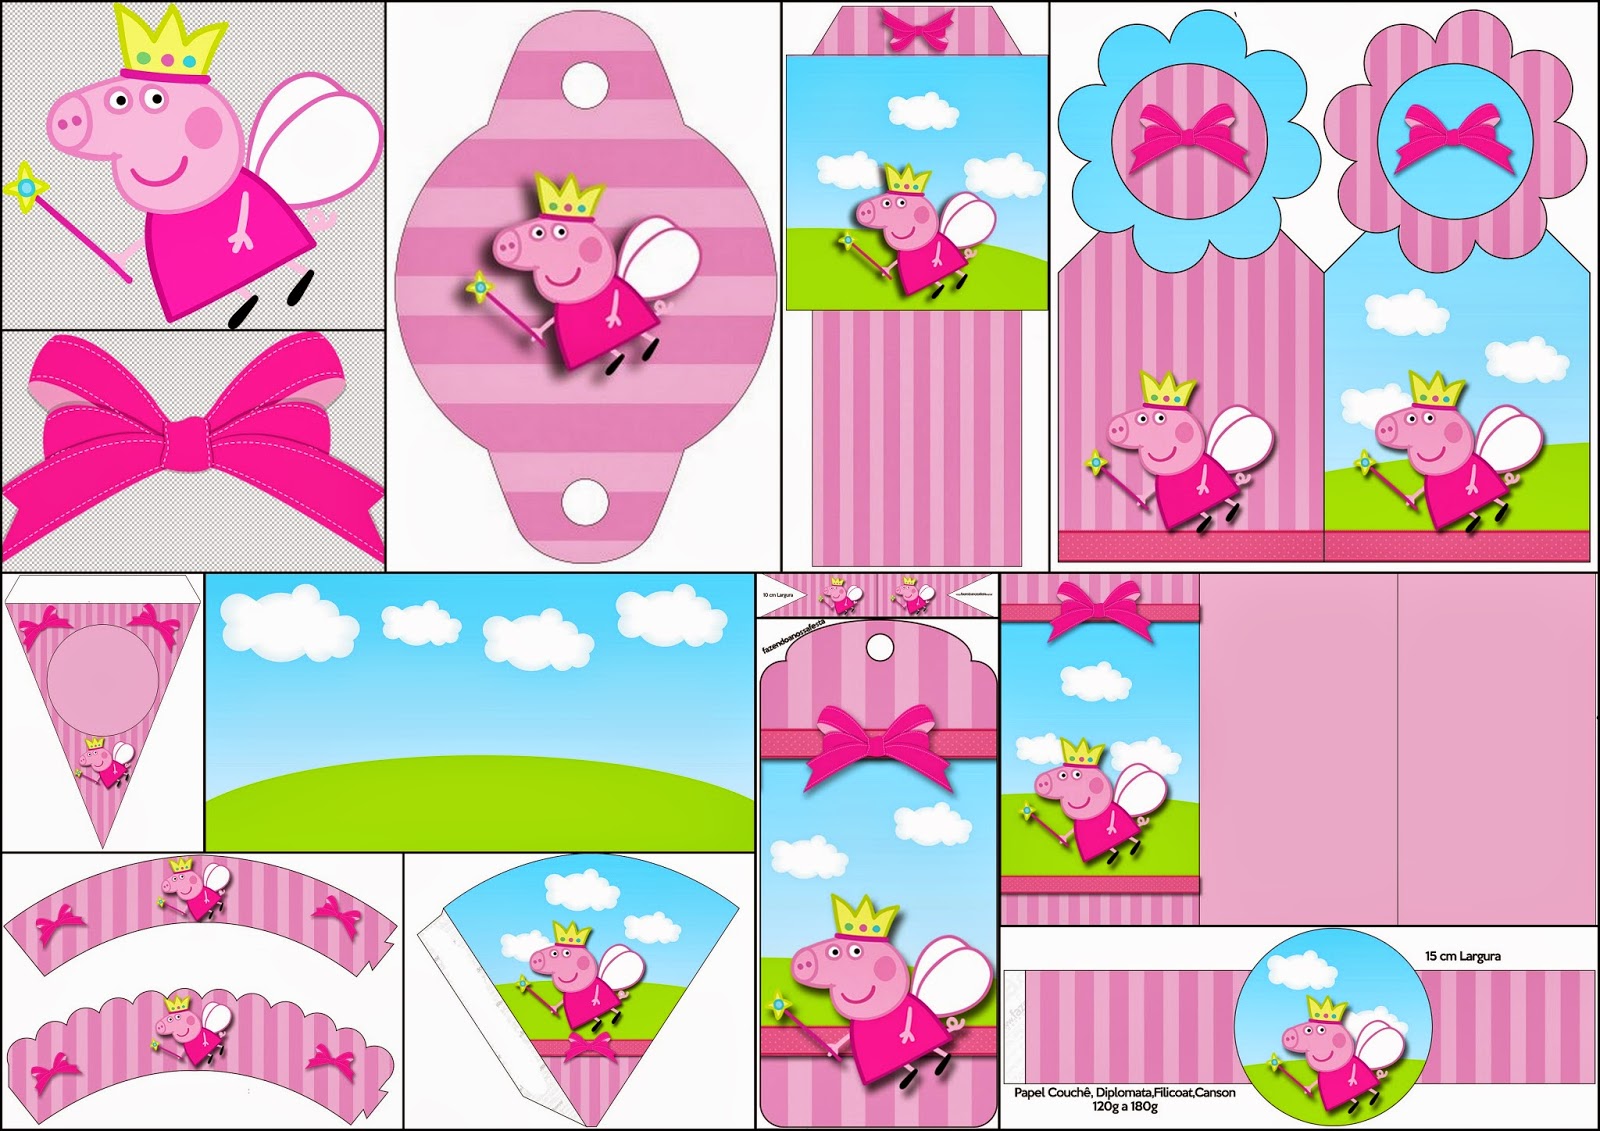 peppa-pig-fairy-free-party-printables-images-and-backgrounds-oh-my